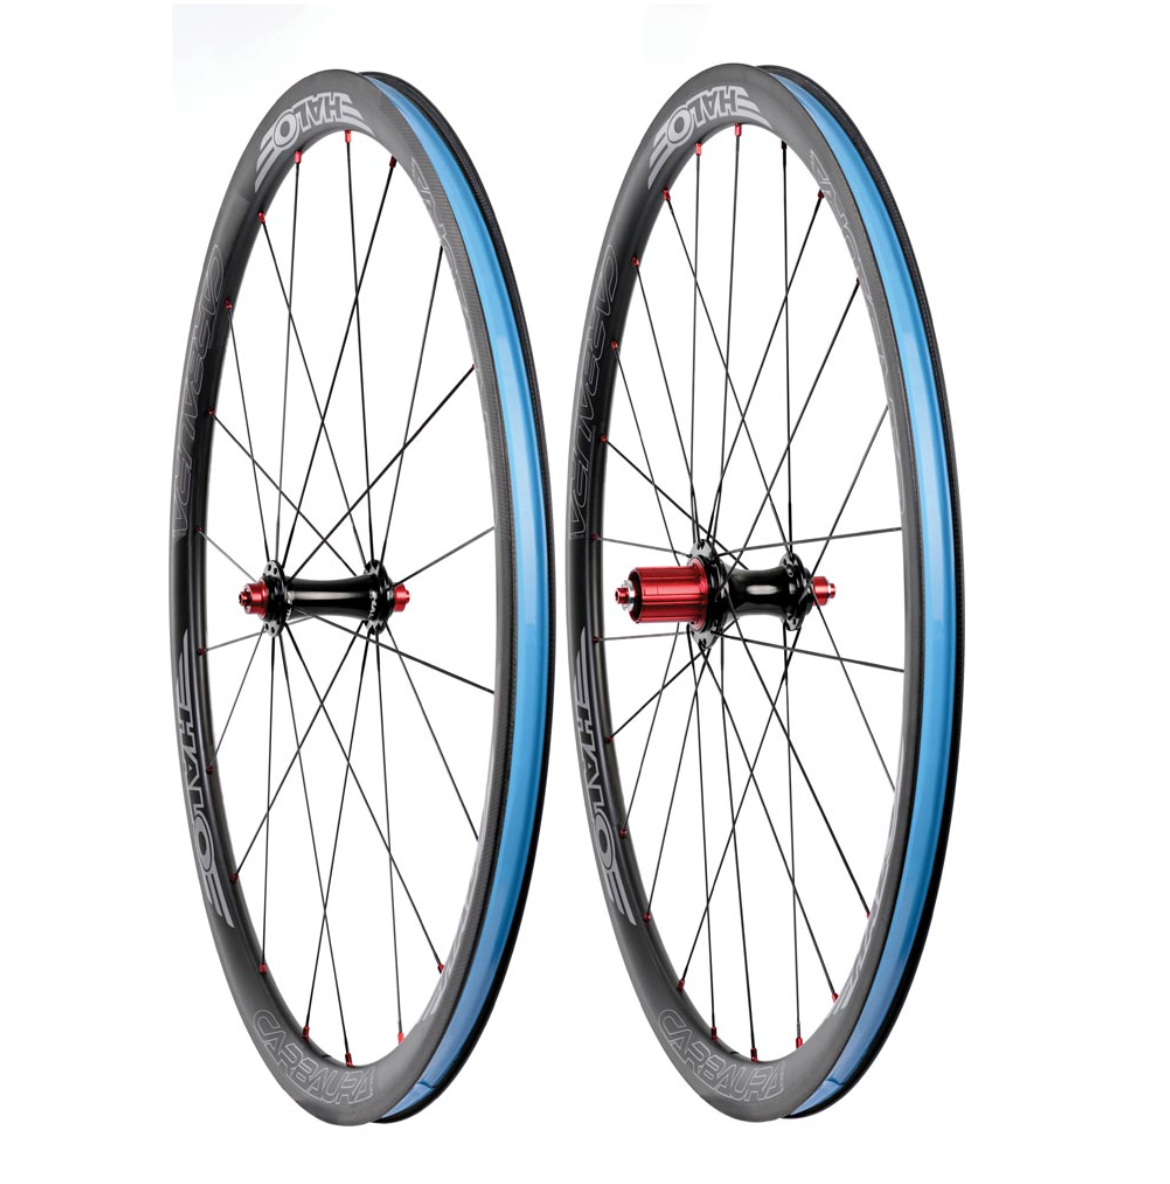 Halo Carbaura RC 700c Wheelsets